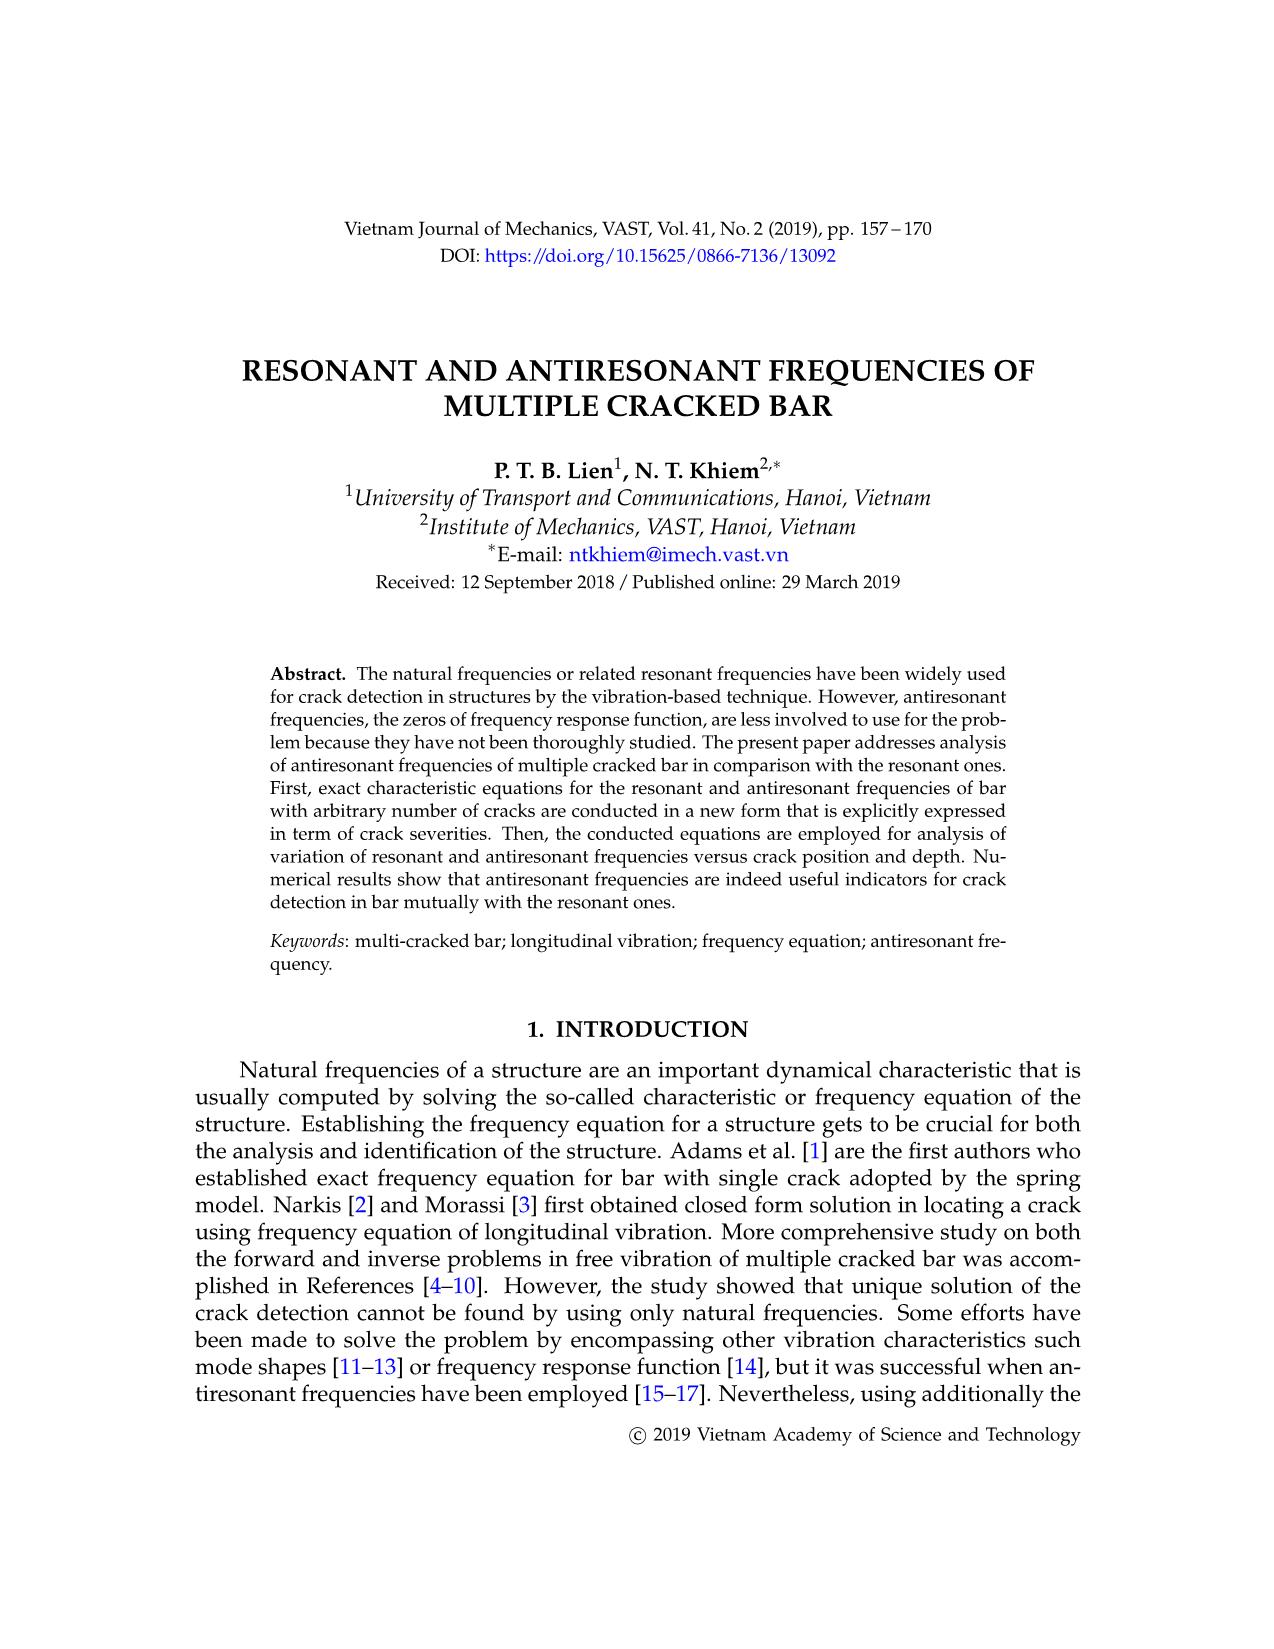 Resonant and antiresonant frequencies of multiple cracked bar trang 1